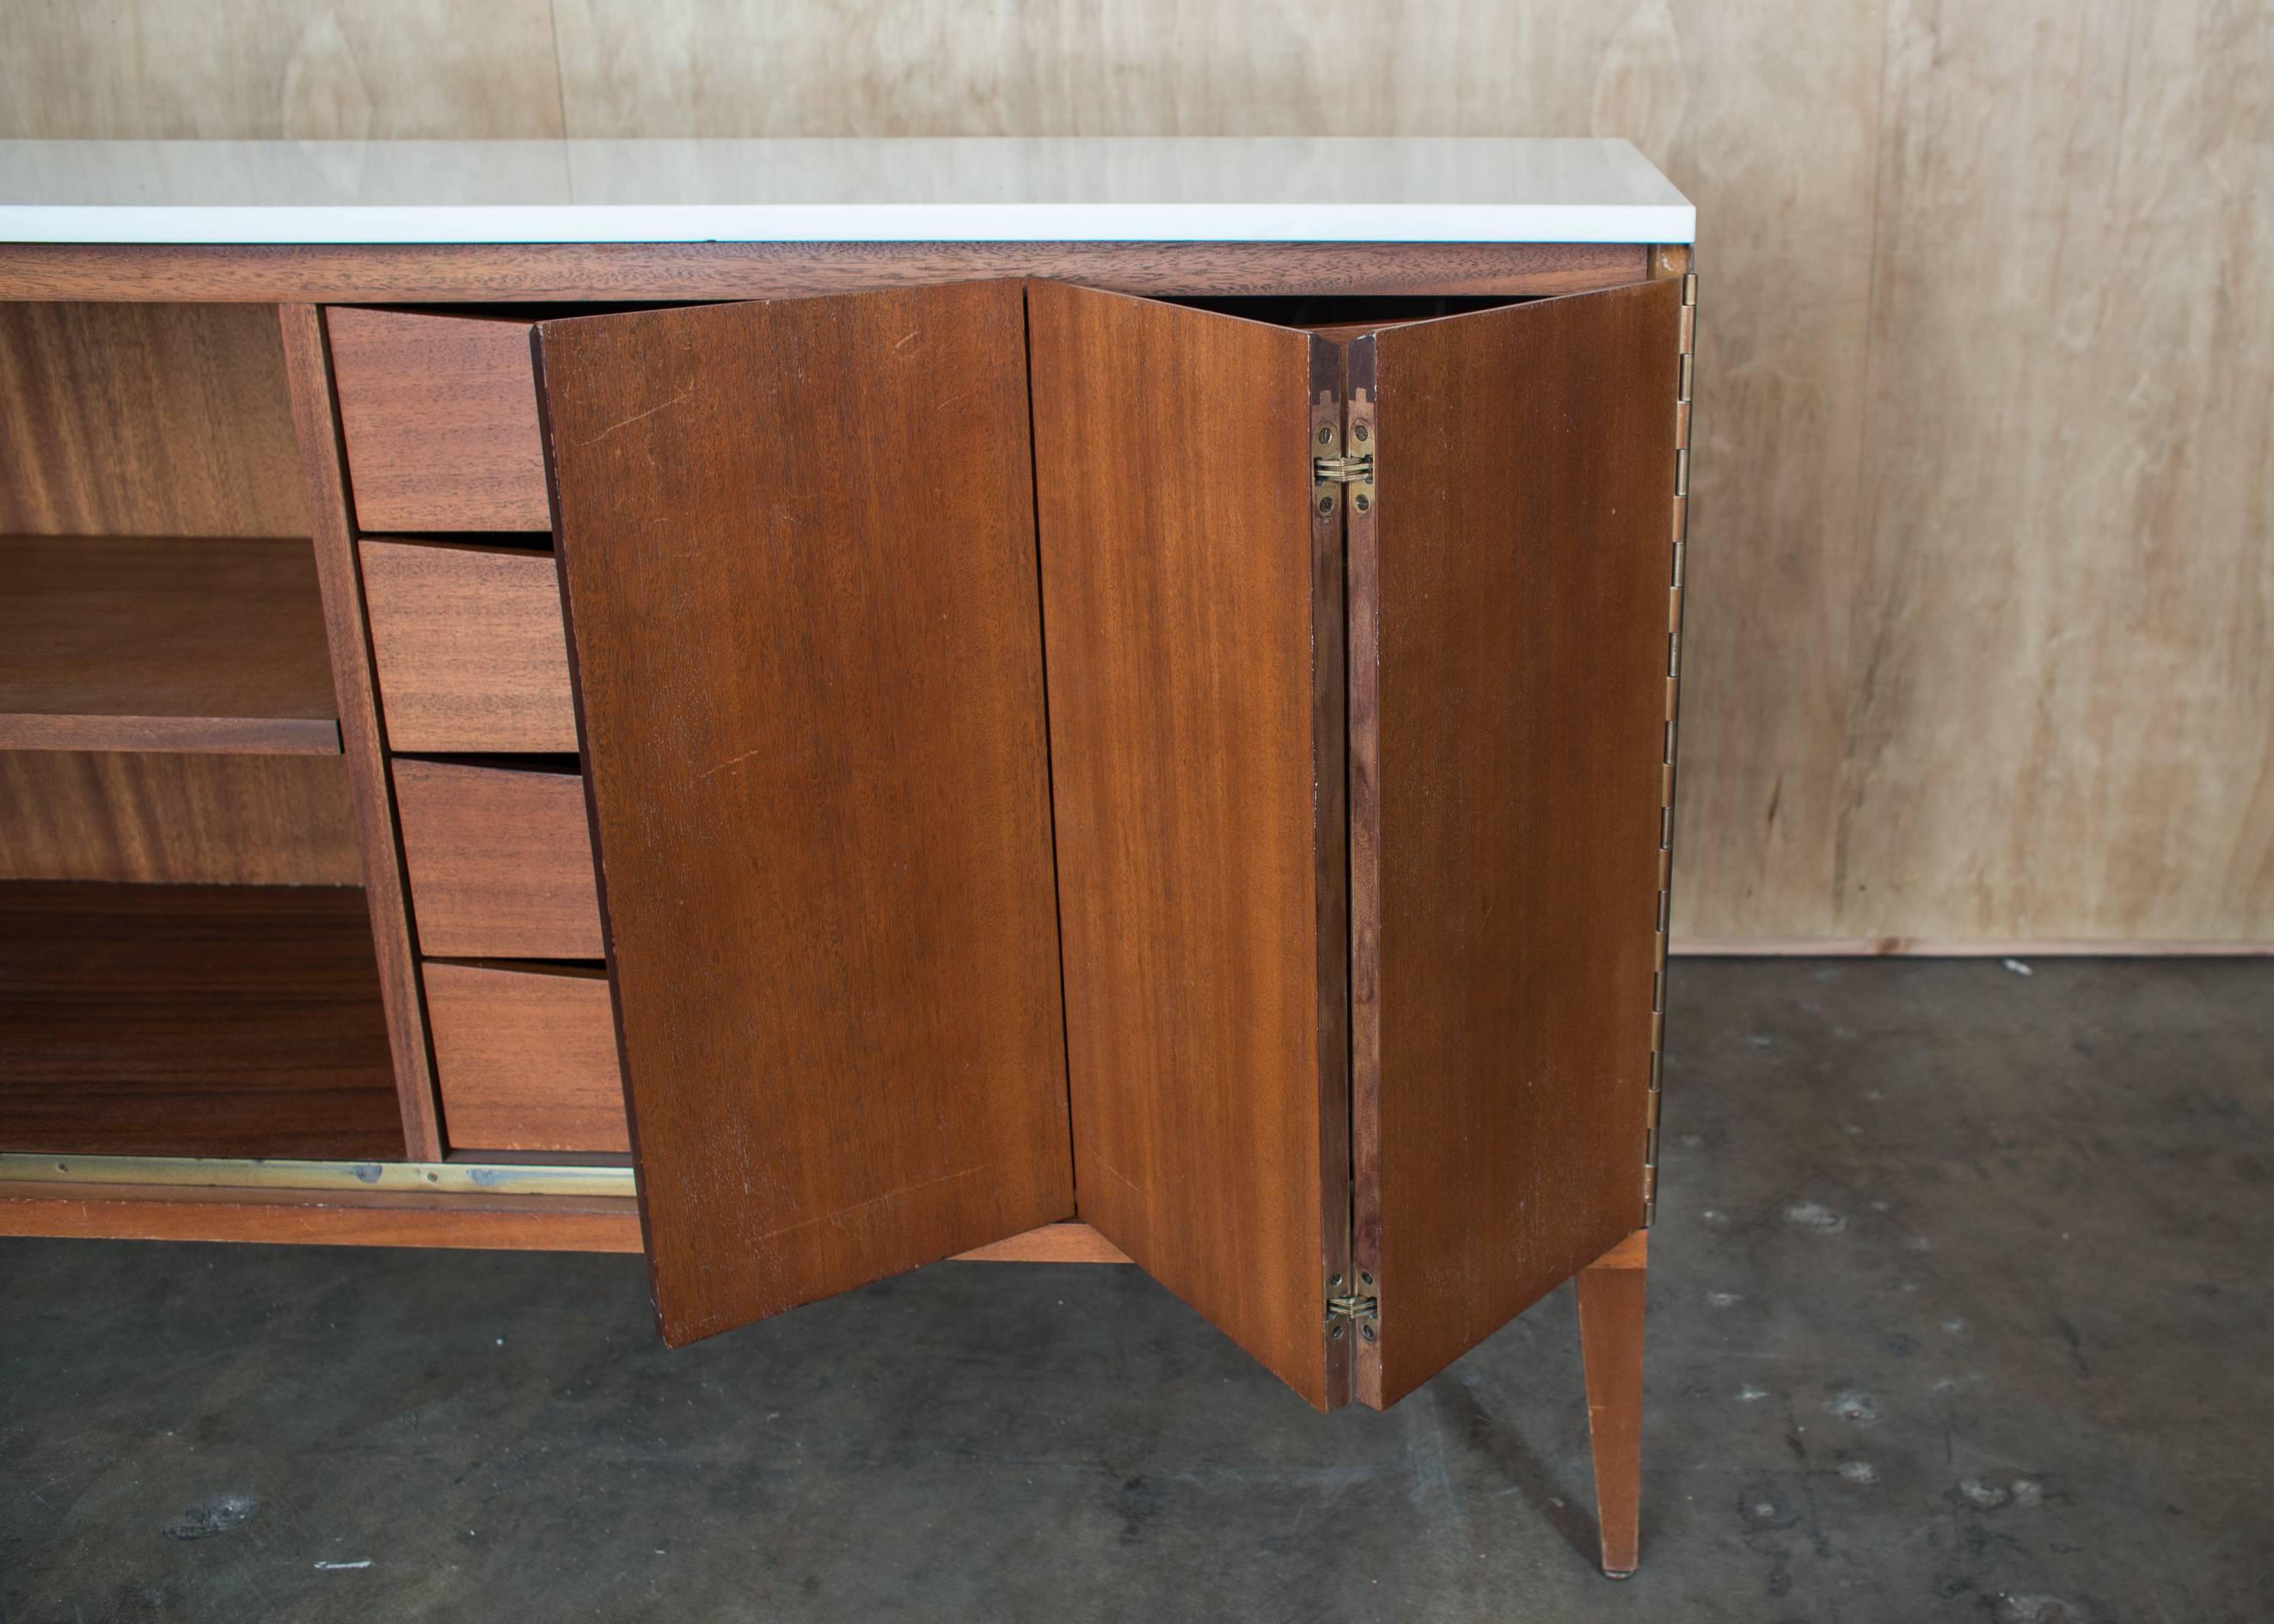 20th Century Paul McCobb Irwin Collection Sideboard Credenza Mahogany Marble Calvin Furniture